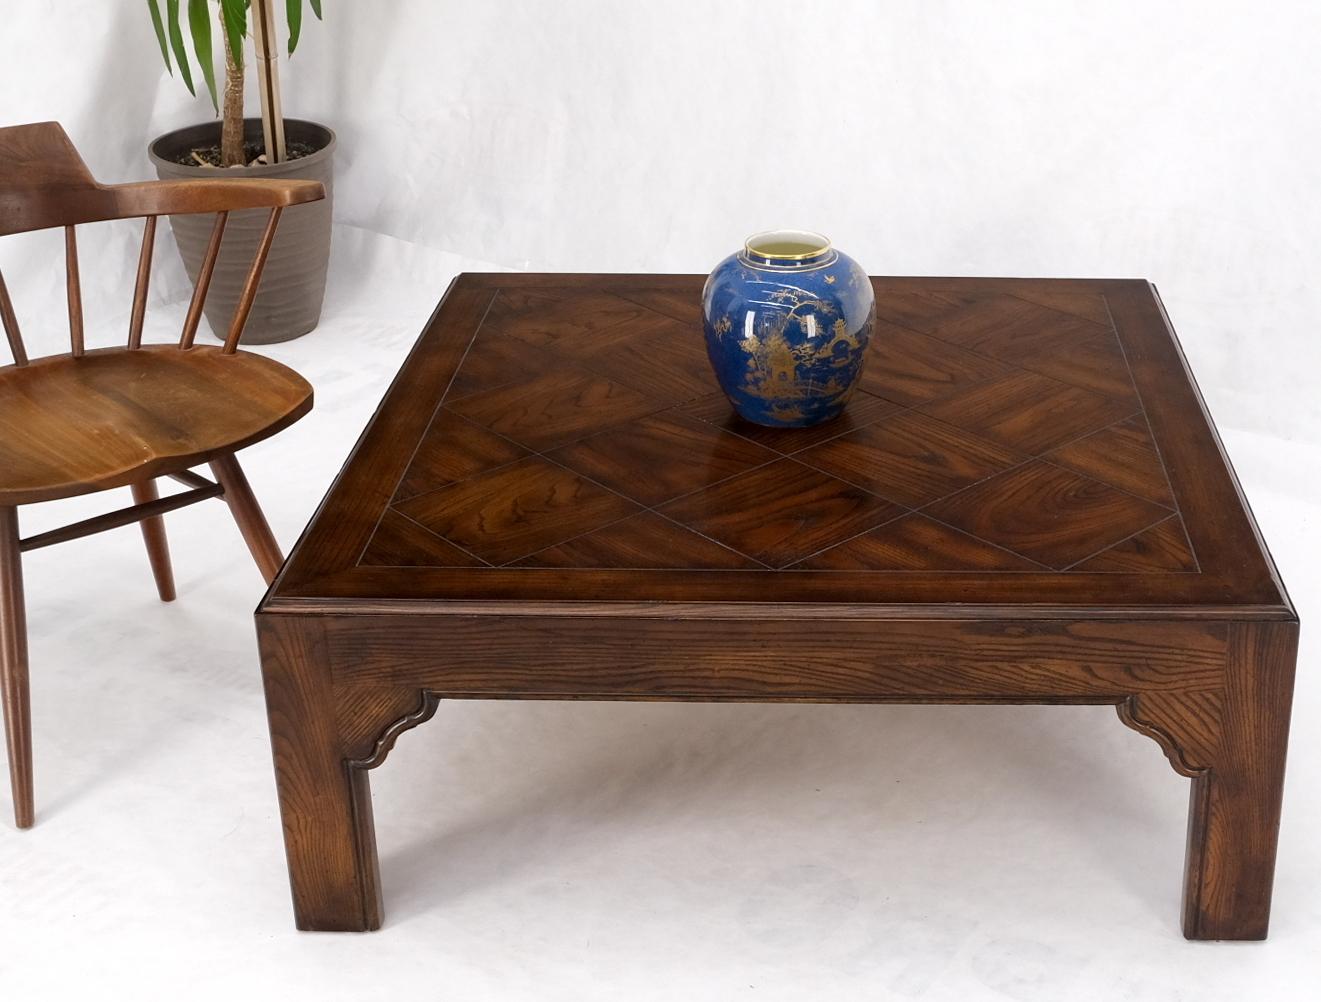 Large decorative square parquetry style coffee table by Henredon. Very solid and heavy construction table.